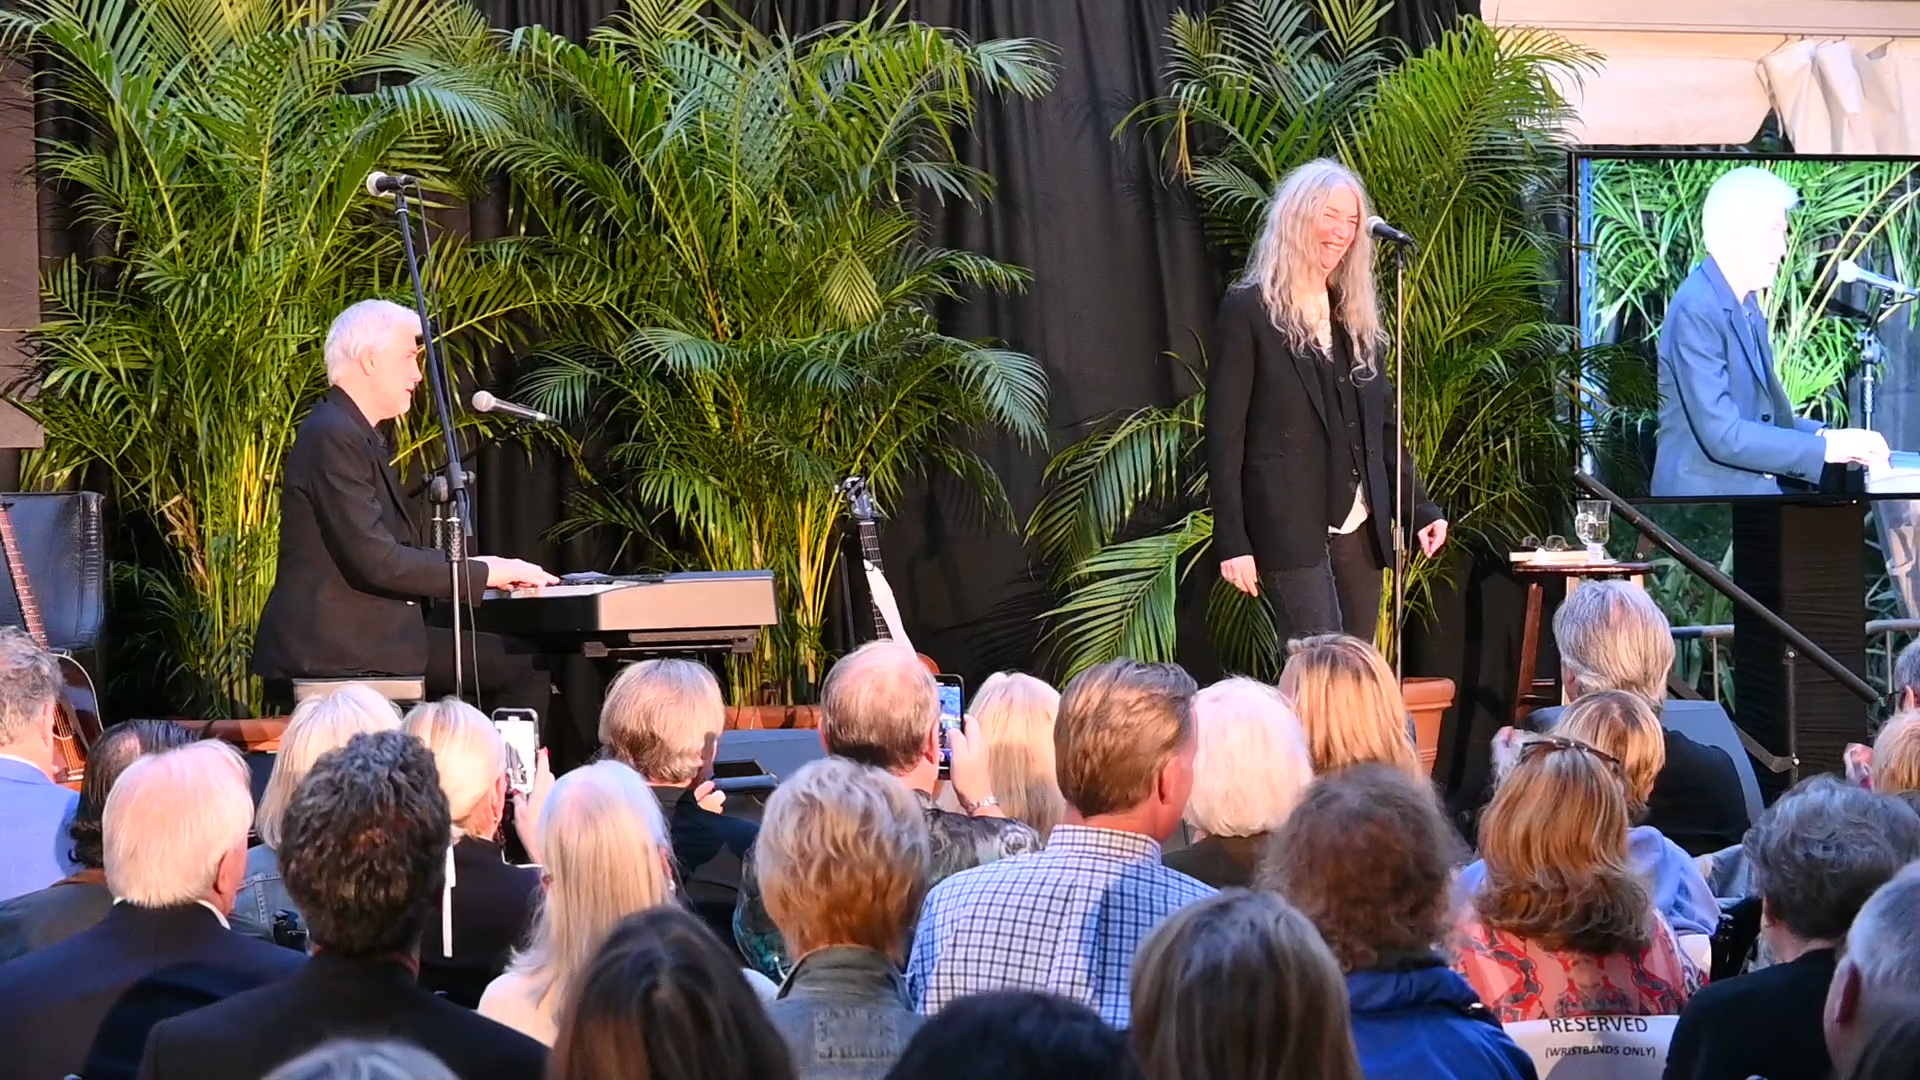 Patti Smith, pictured during a February performance at Selby Gardens, will be coming back as an ambassador. (Photo: Spencer Fordin)